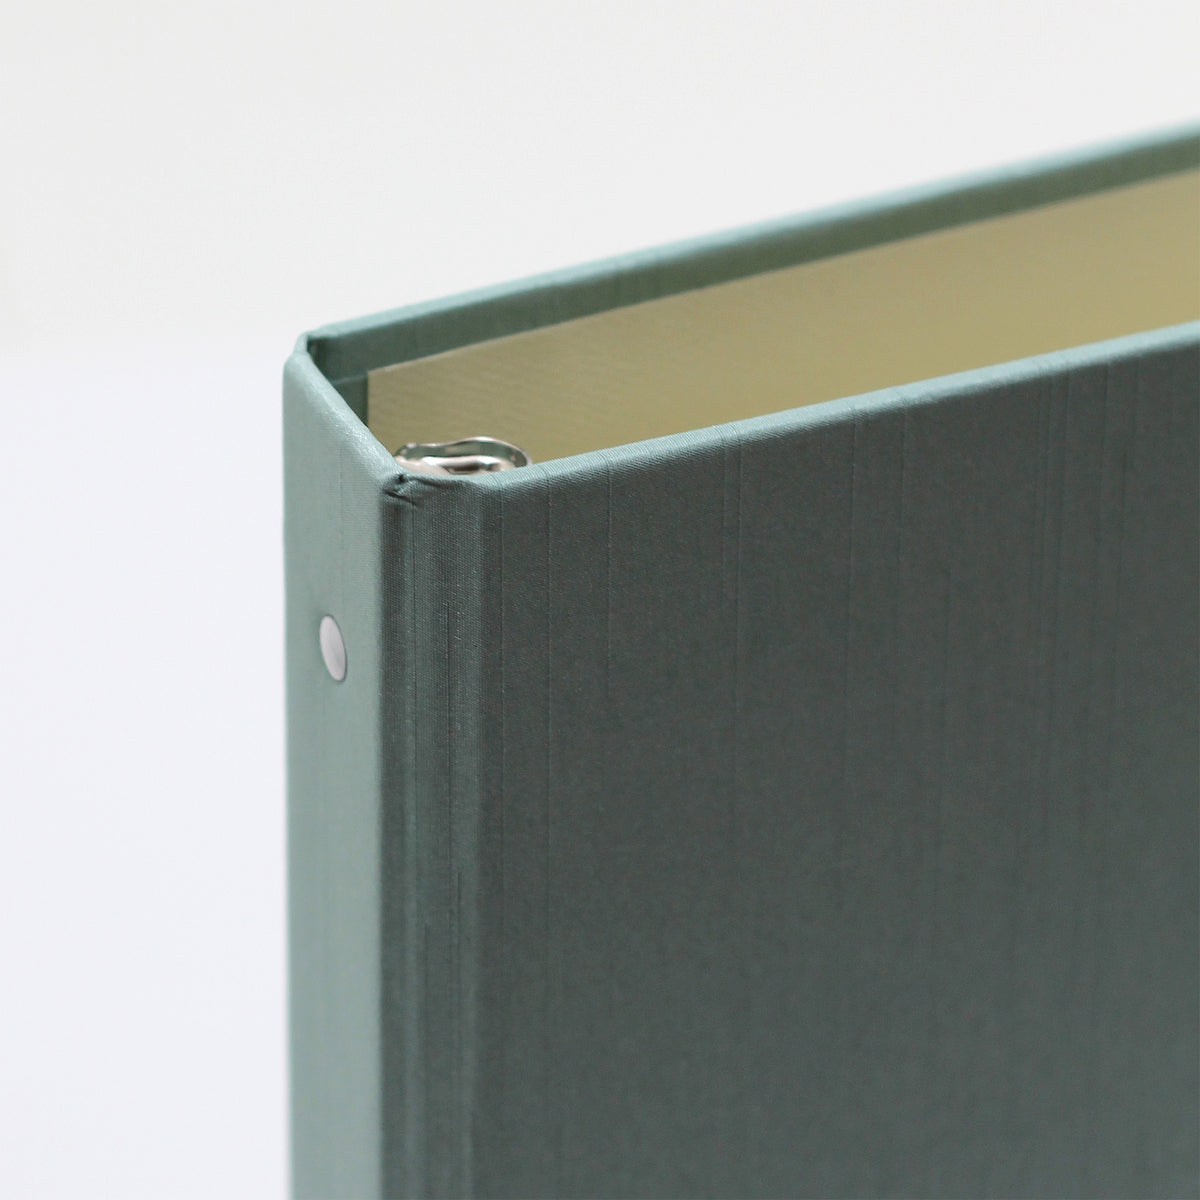 Storage Binder for Photos or Documents with Misty Blue Silk Cover